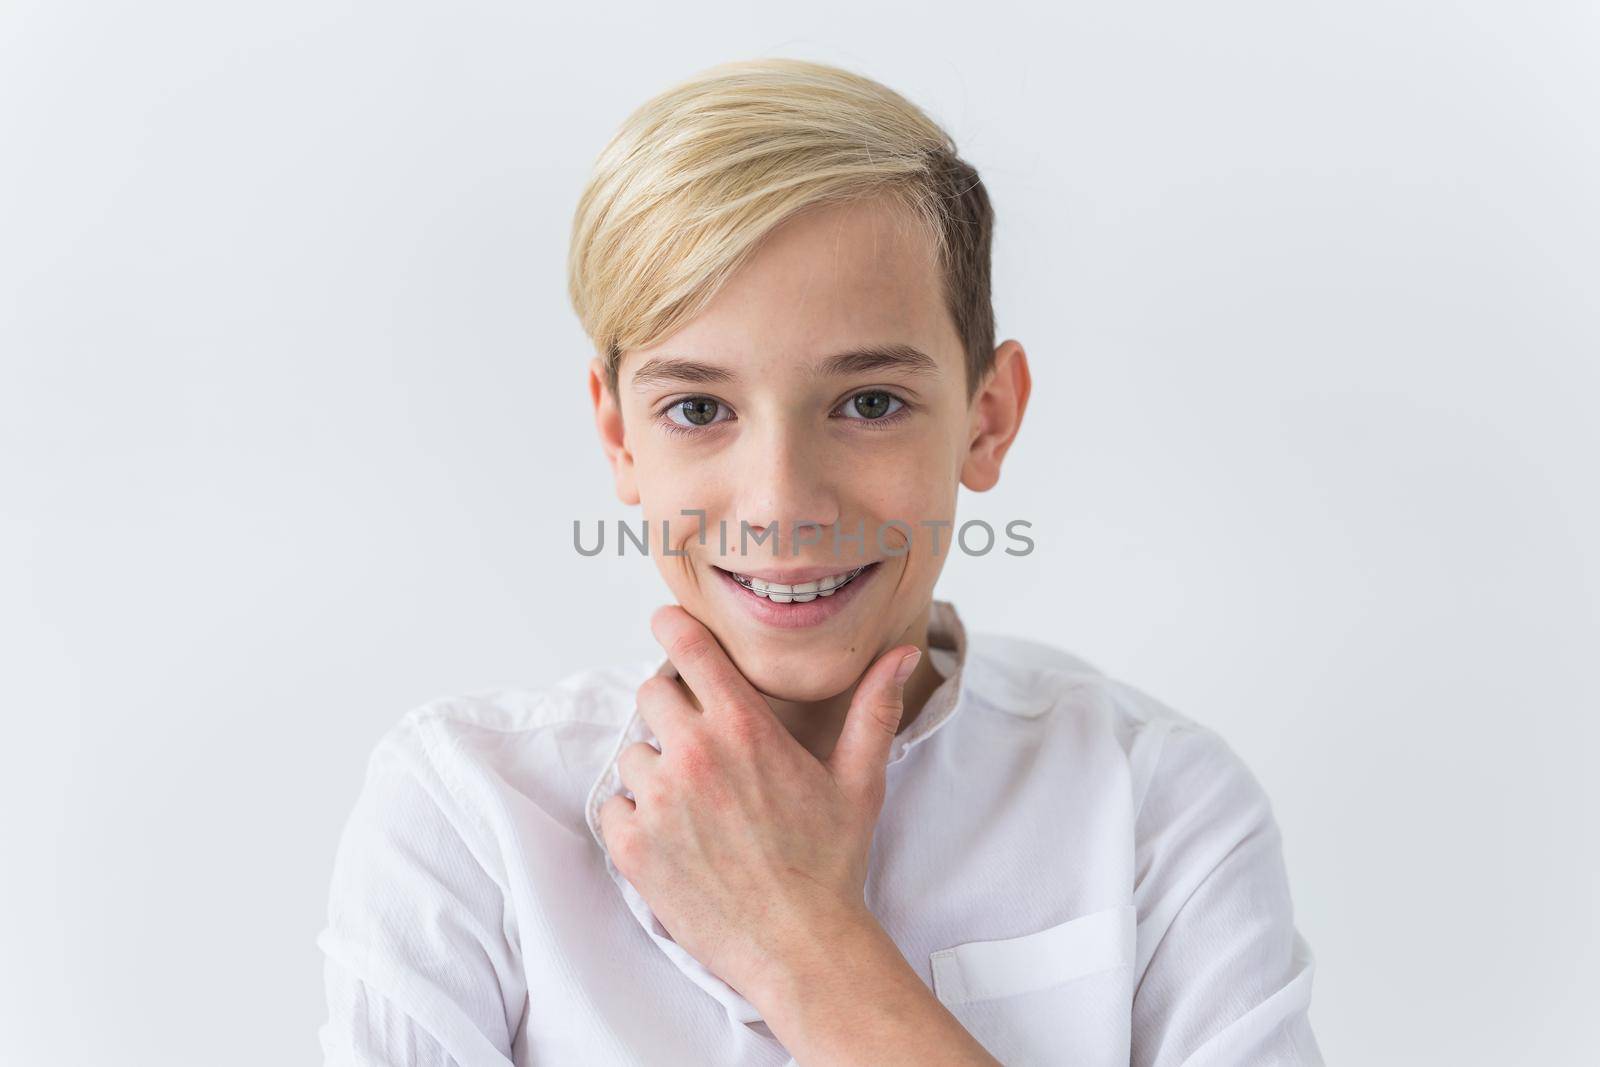 Close-up of teen boy with braces on teeth smiling on white background. Dentistry and teenager concept. by Satura86